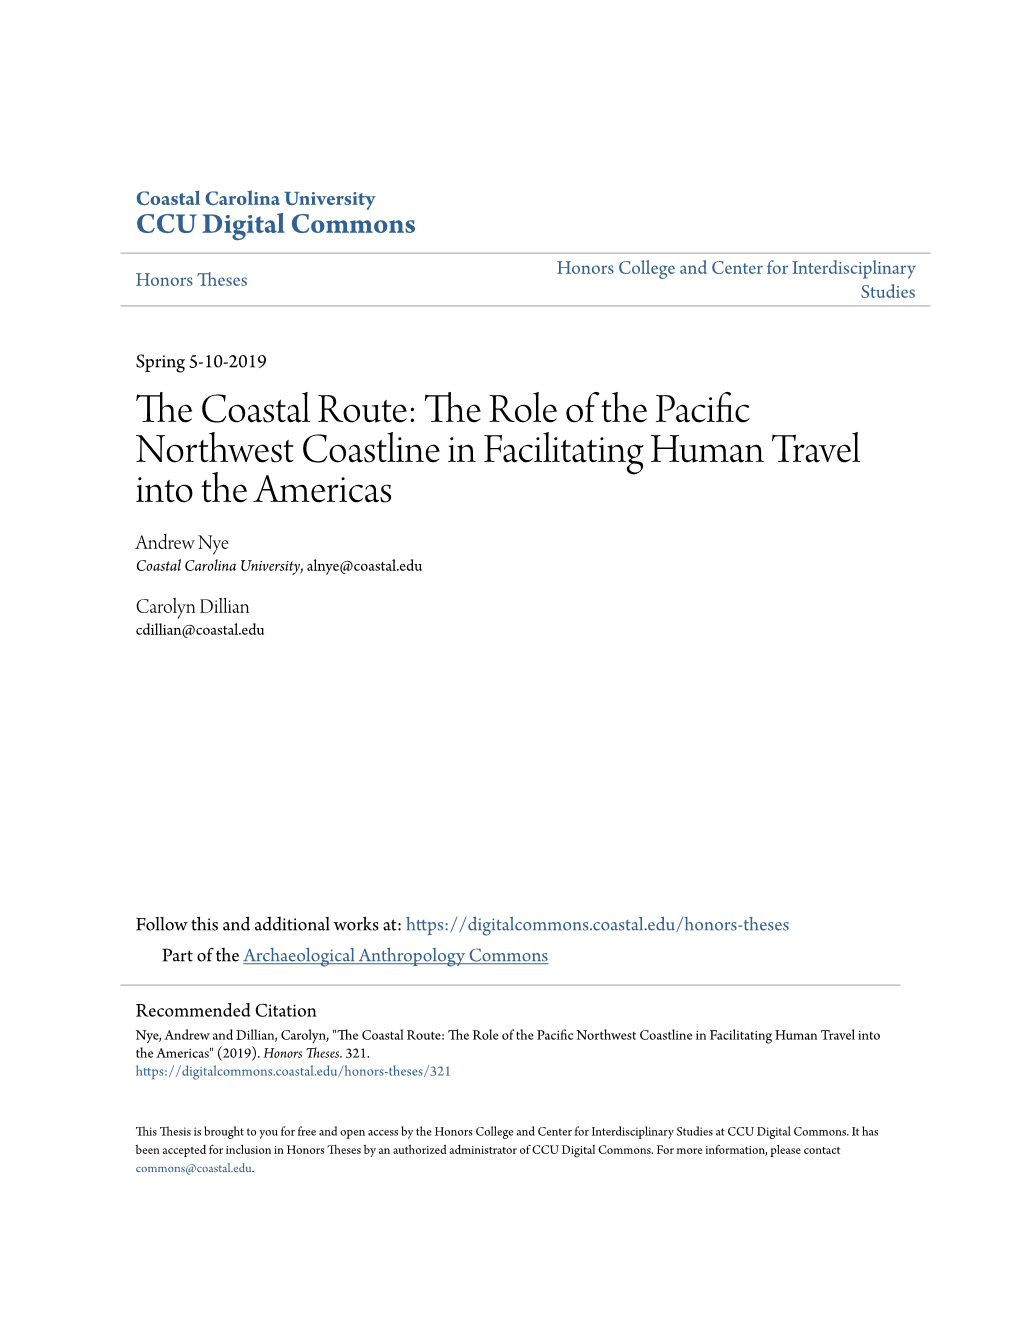 The Coastal Route the Role of the Pacific Northwest Coastline in Facilitating Human Travel Into the Americas